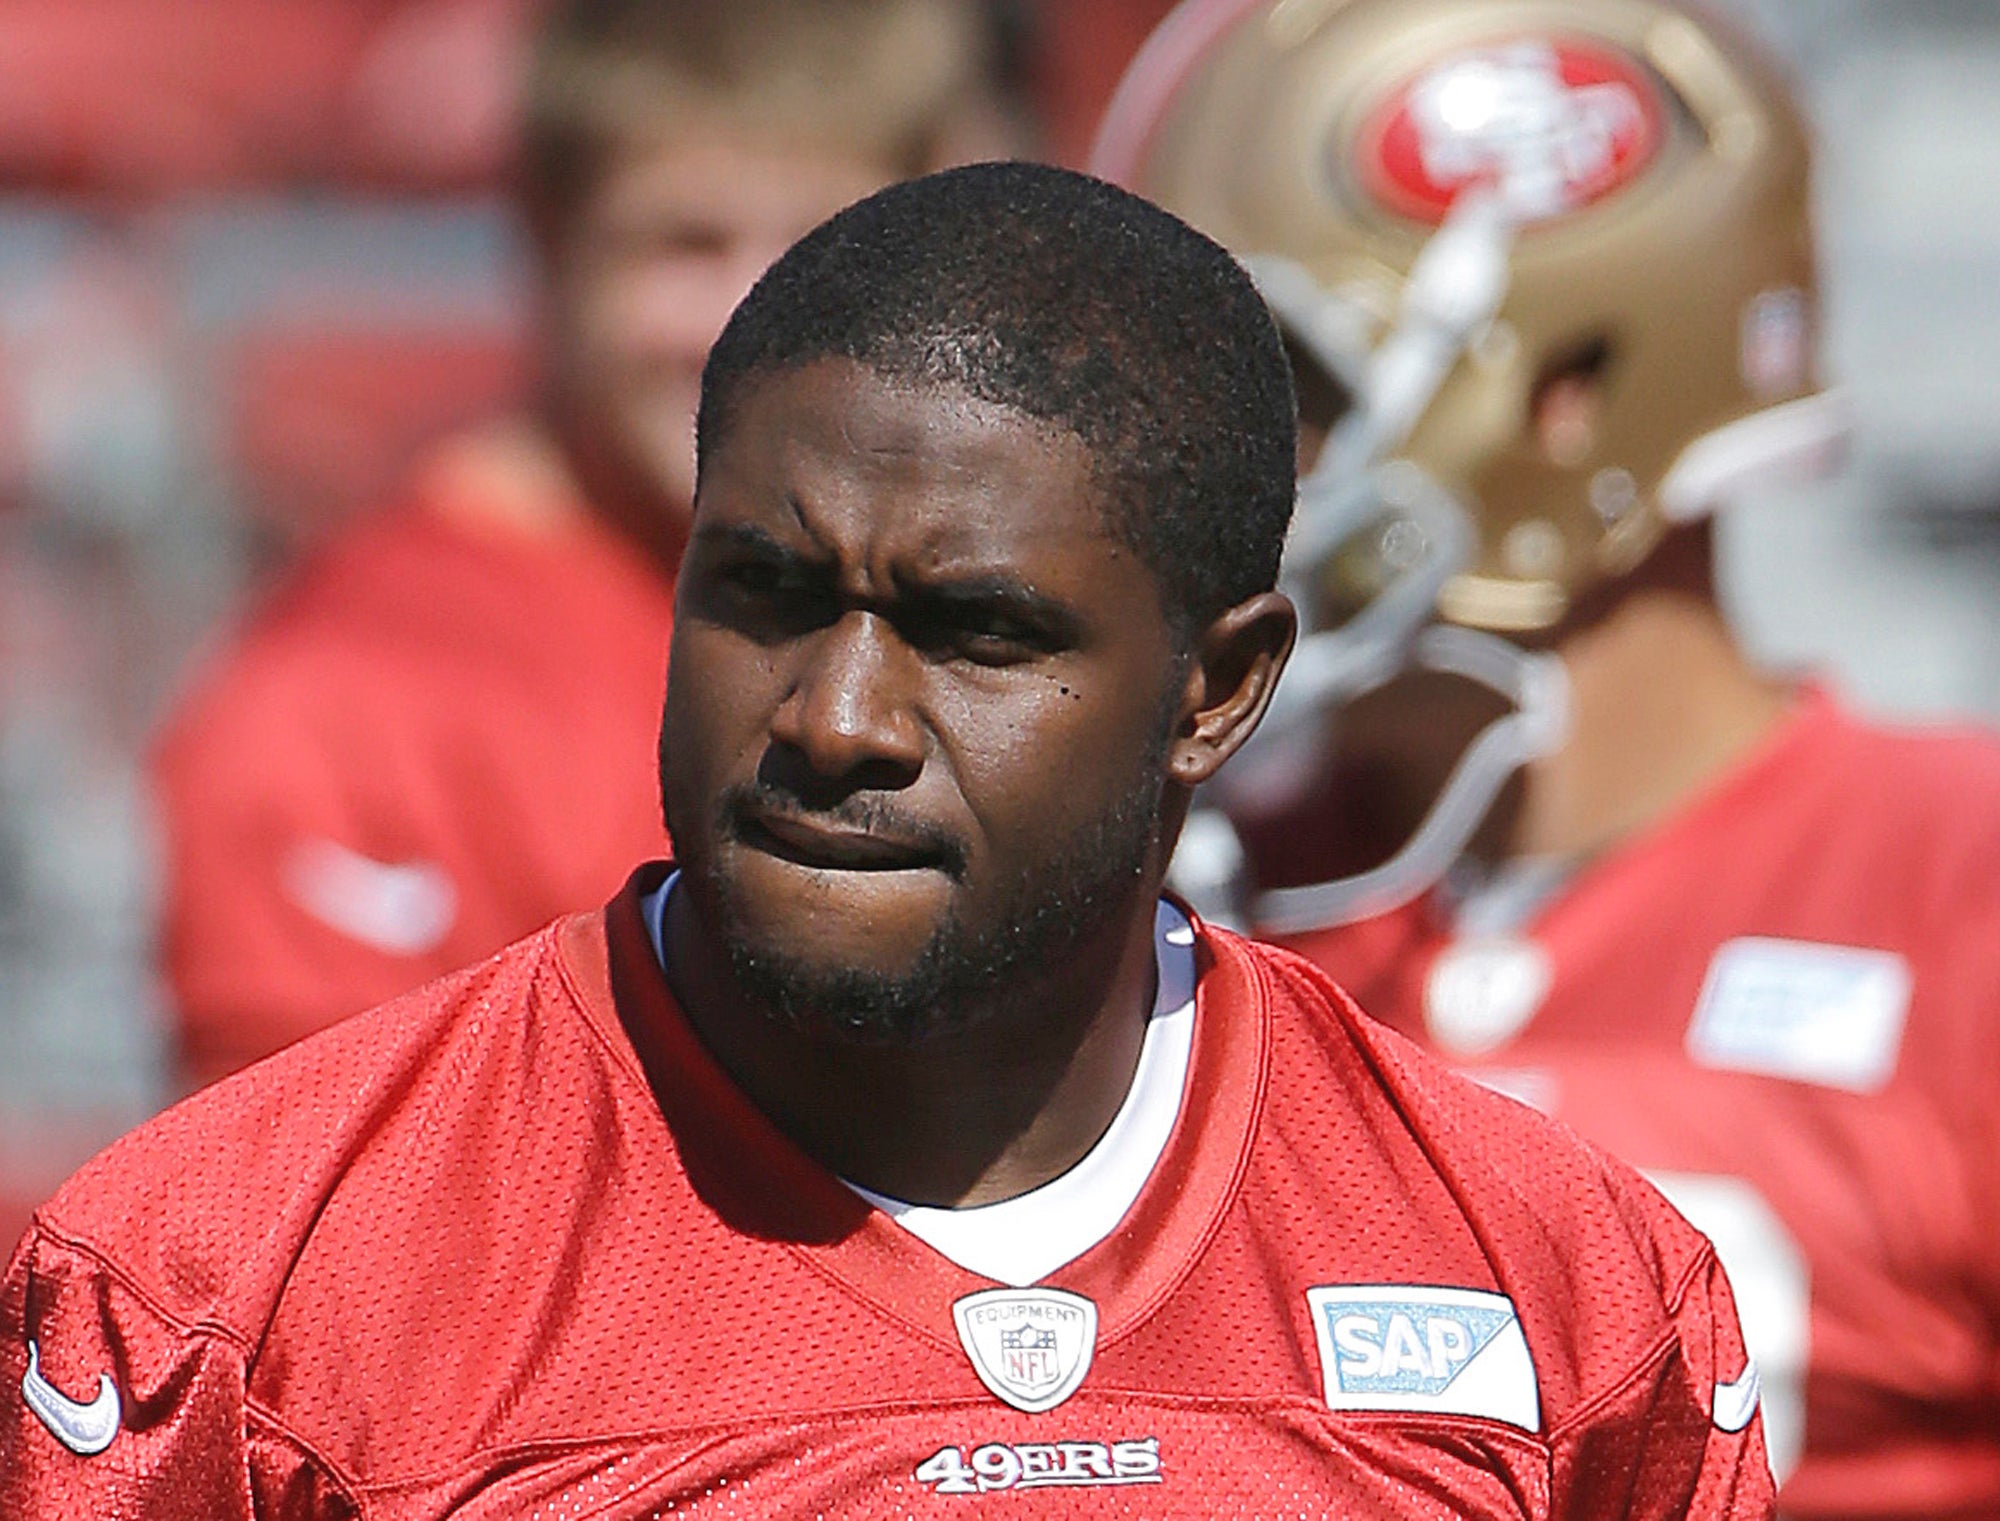 Former NFL running back Reggie Bush is suing the NCAA, arguing he was wrongly accused of a ‘pay-for-play’ scheme as a student-athlete